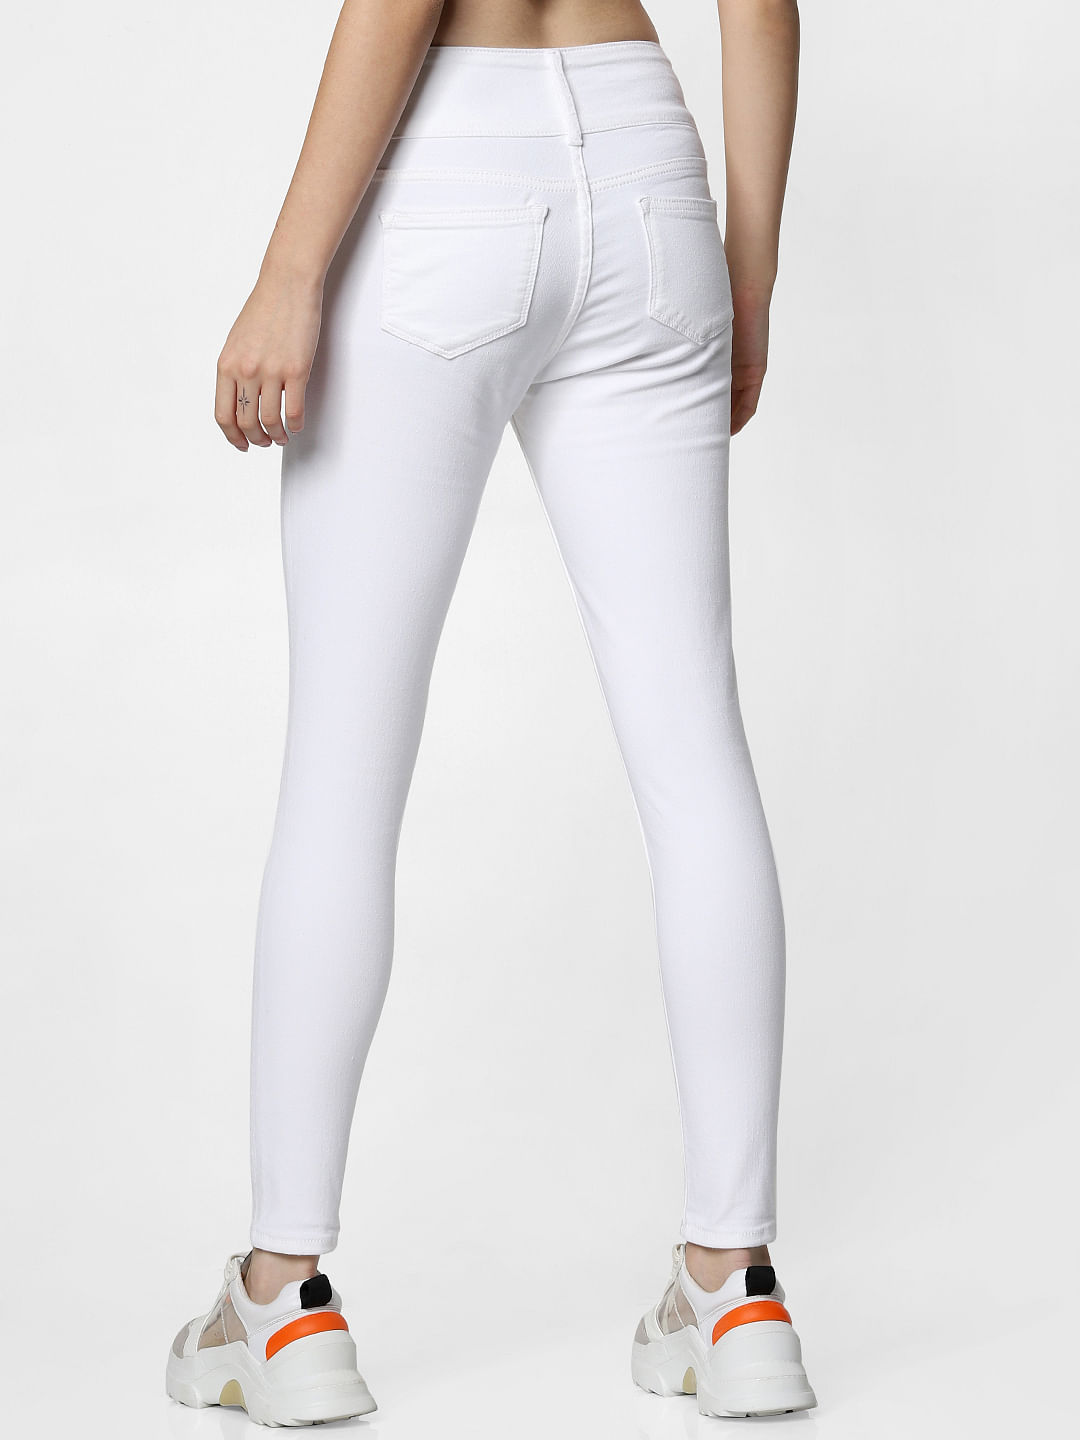 The Best White Jeans For WomenShop Our Favorite Cuts and Washes  Vogue